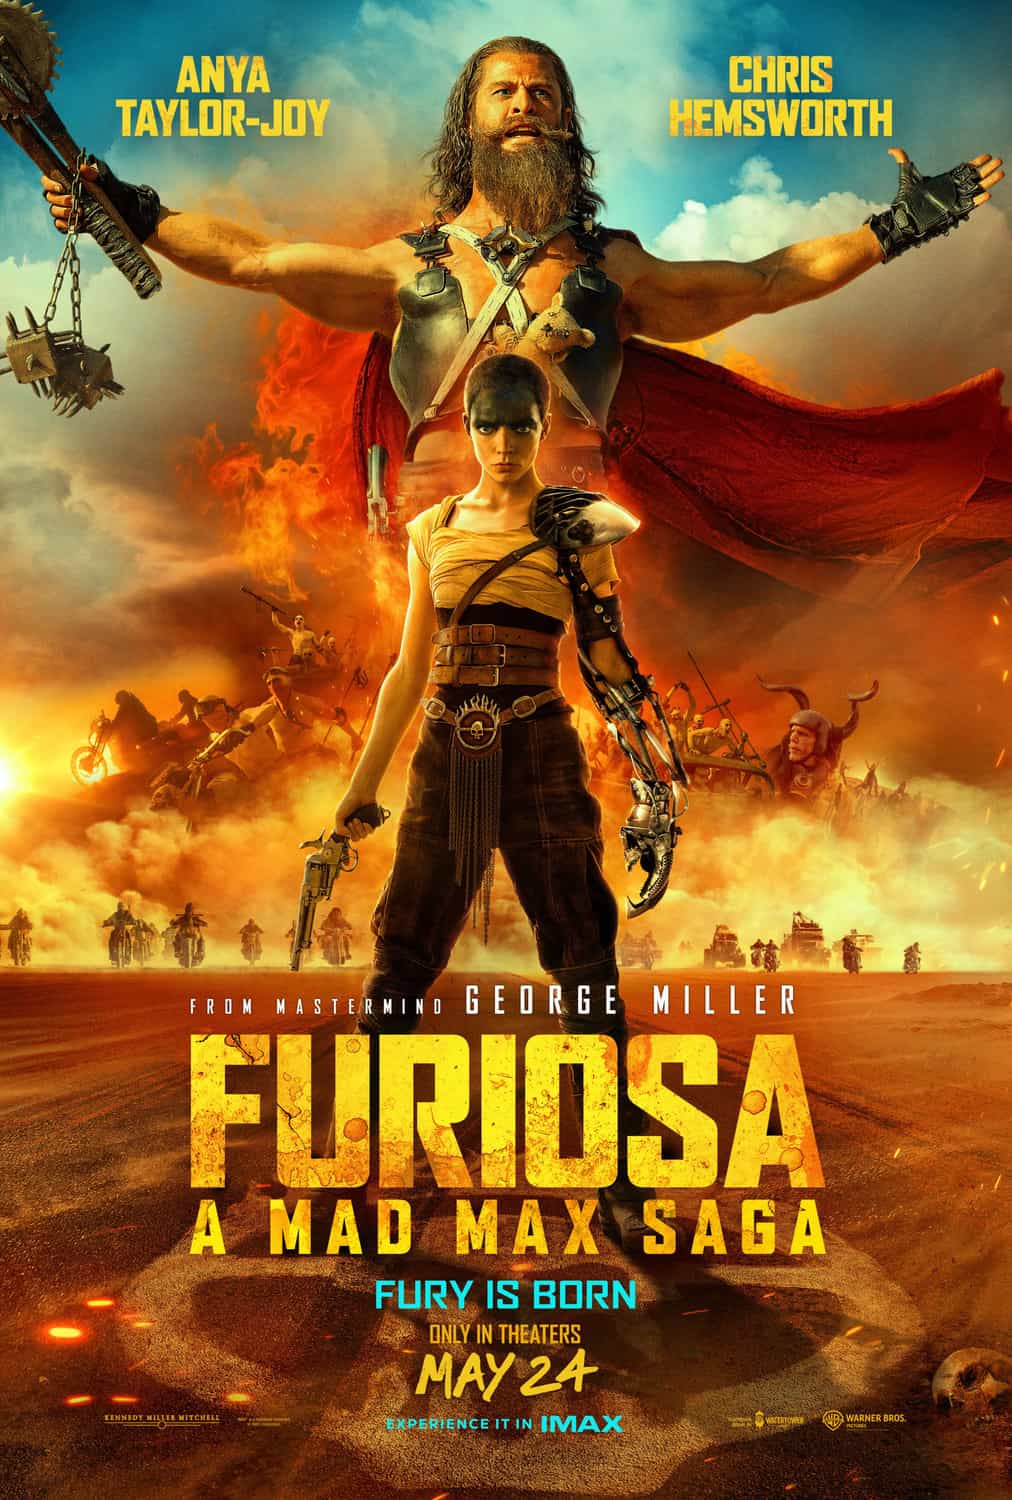 This weeks North American new movie preview 24th May 2024 - Furiosa, Hit Man, Kidnapped, Atlas and The Garfield Movie